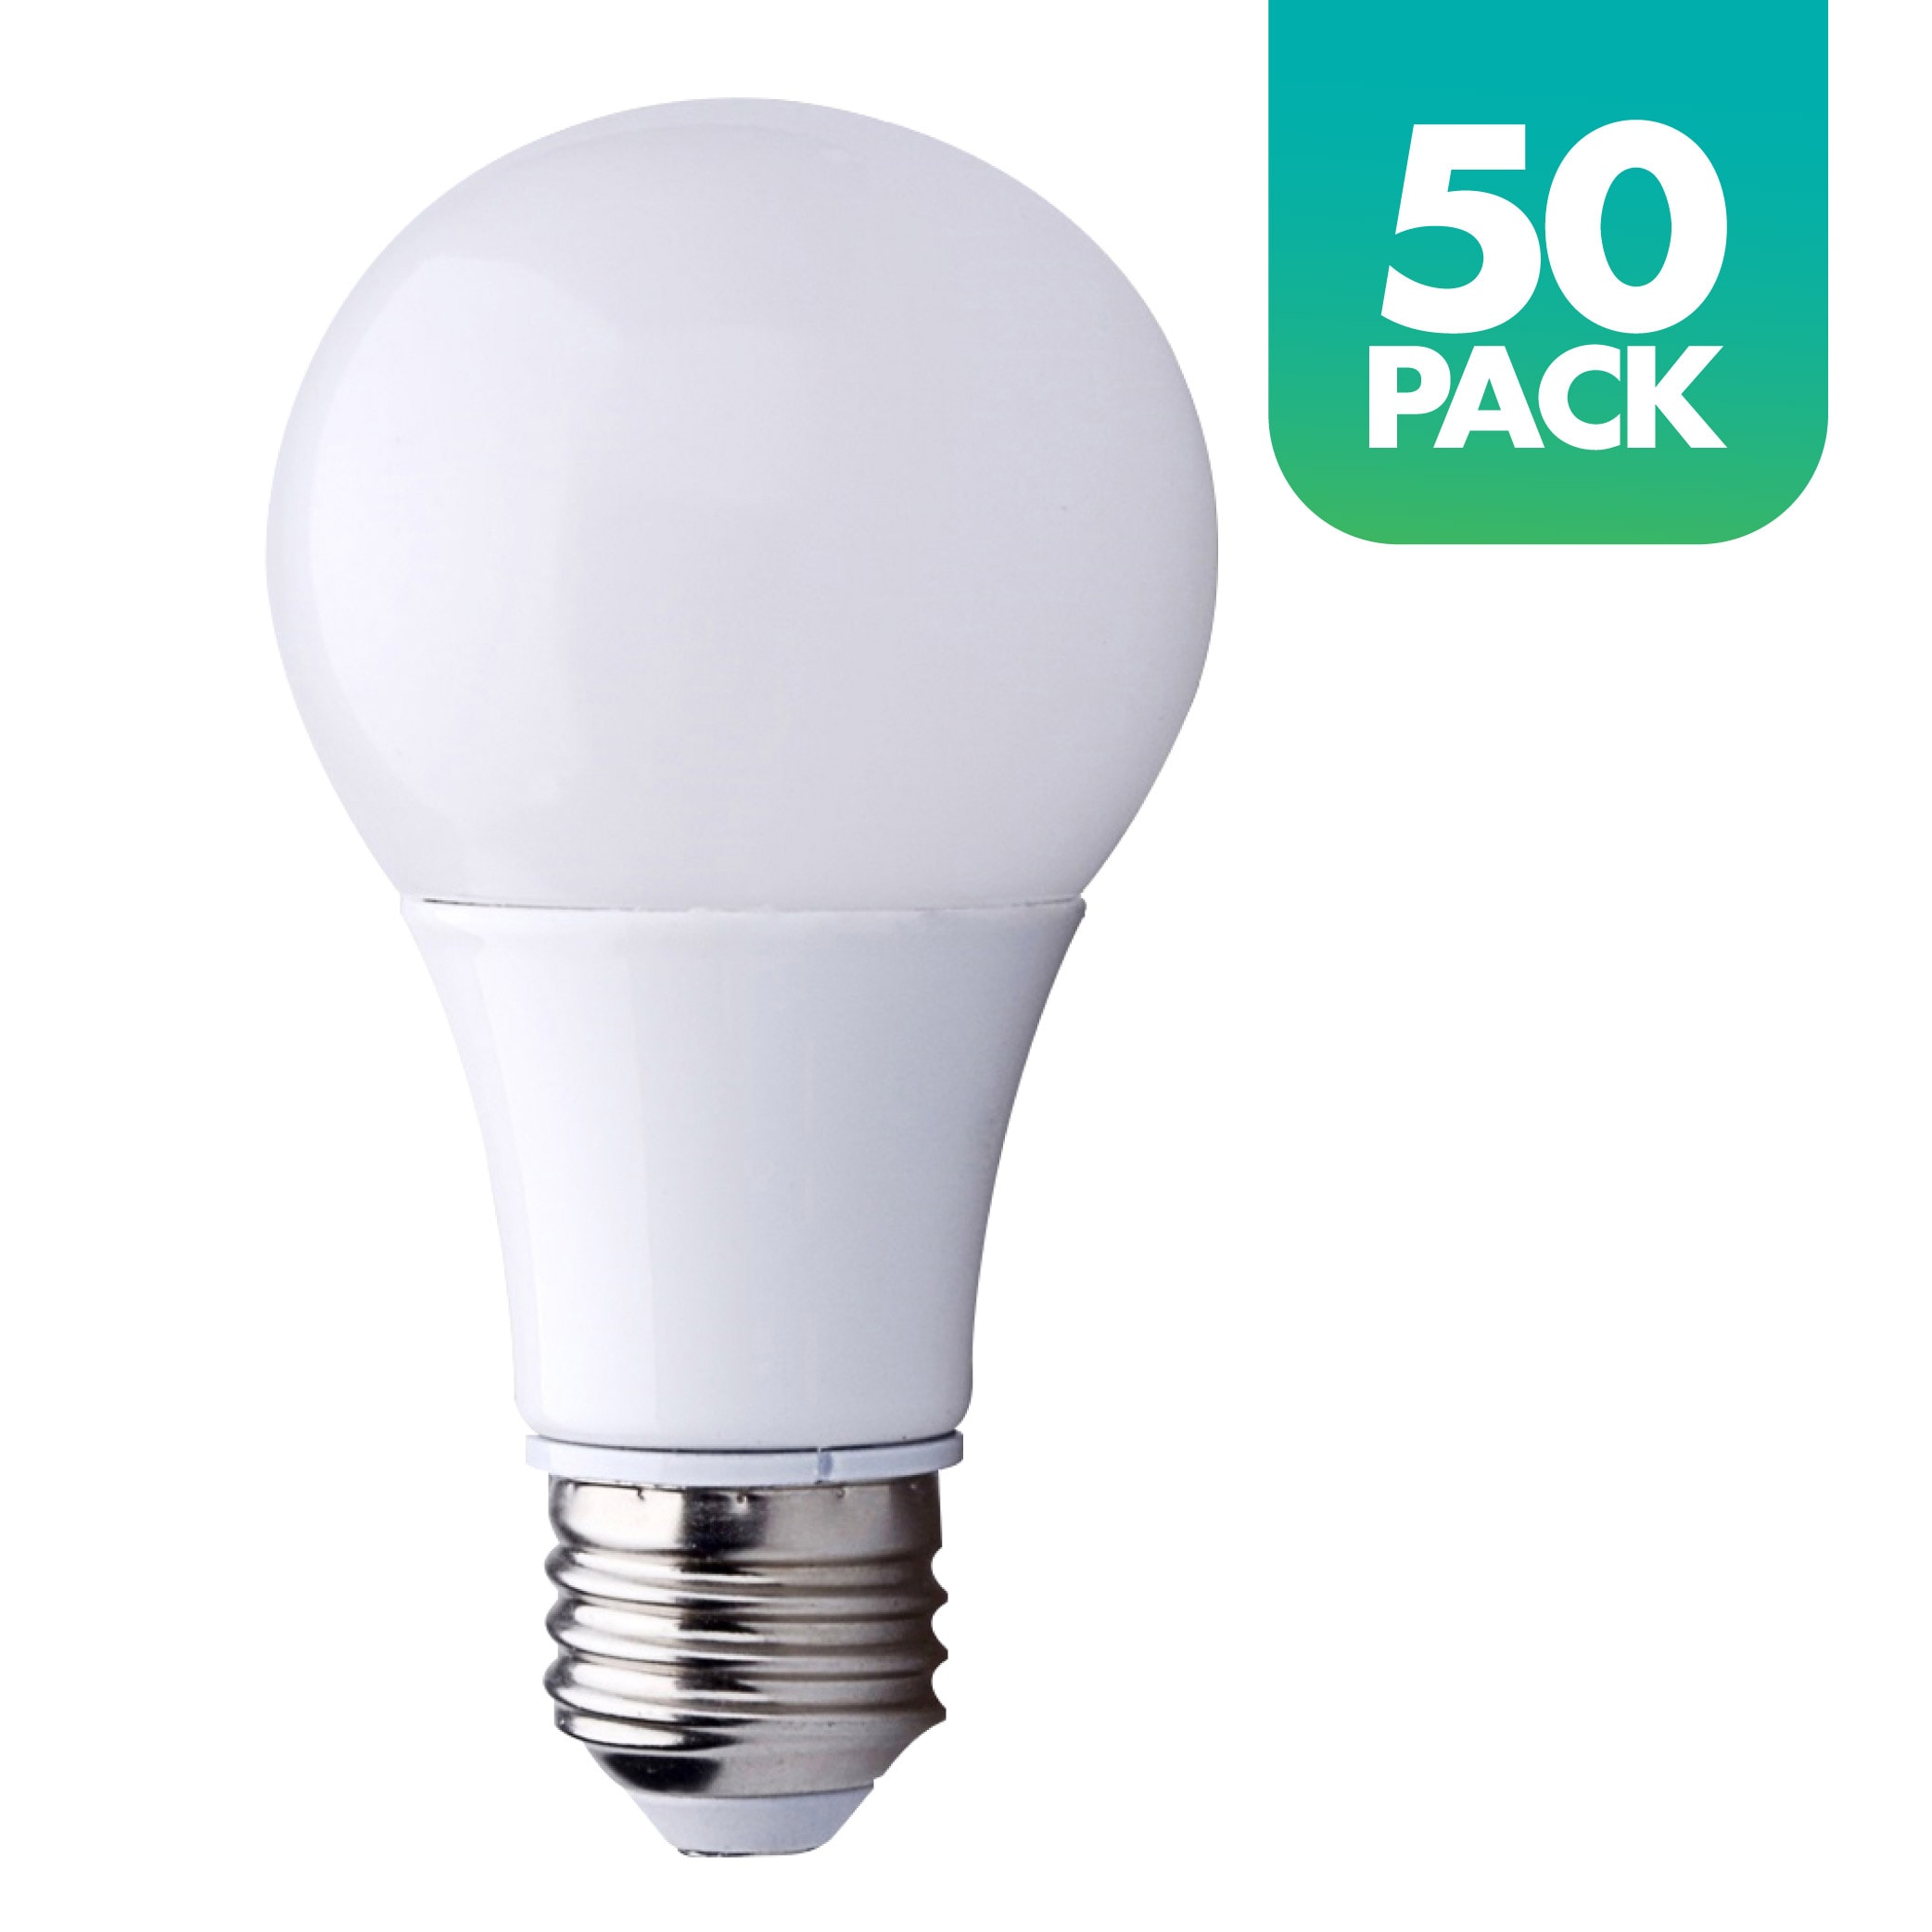 Simply Conserve ENERGY STAR 60-Watt EQ A19 Daylight Medium Base (e-26) Dimmable LED Bulb (50-Pack) in the General Purpose LED Light Bulbs department at Lowes.com